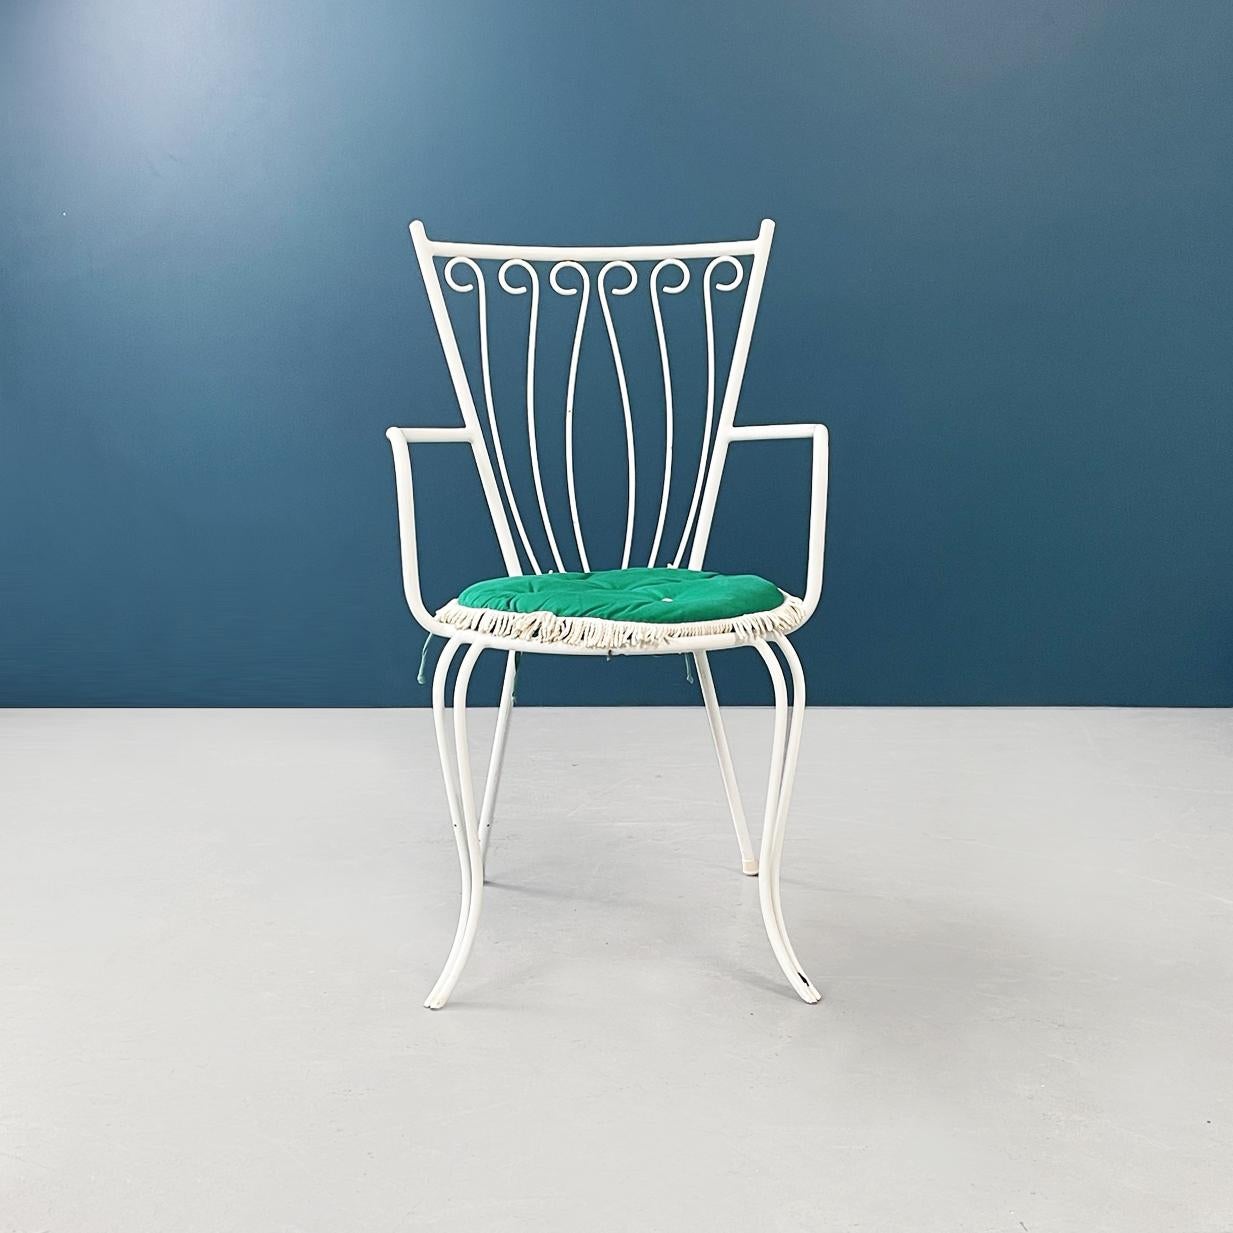 Italian mid-century garden chairs in white wrought iron and green fabric, 1960s
Set of 4 garden chairs in white painted wrought iron. The round seat is made up of a series of springs on which a padded cushion is placed, covered in forest green